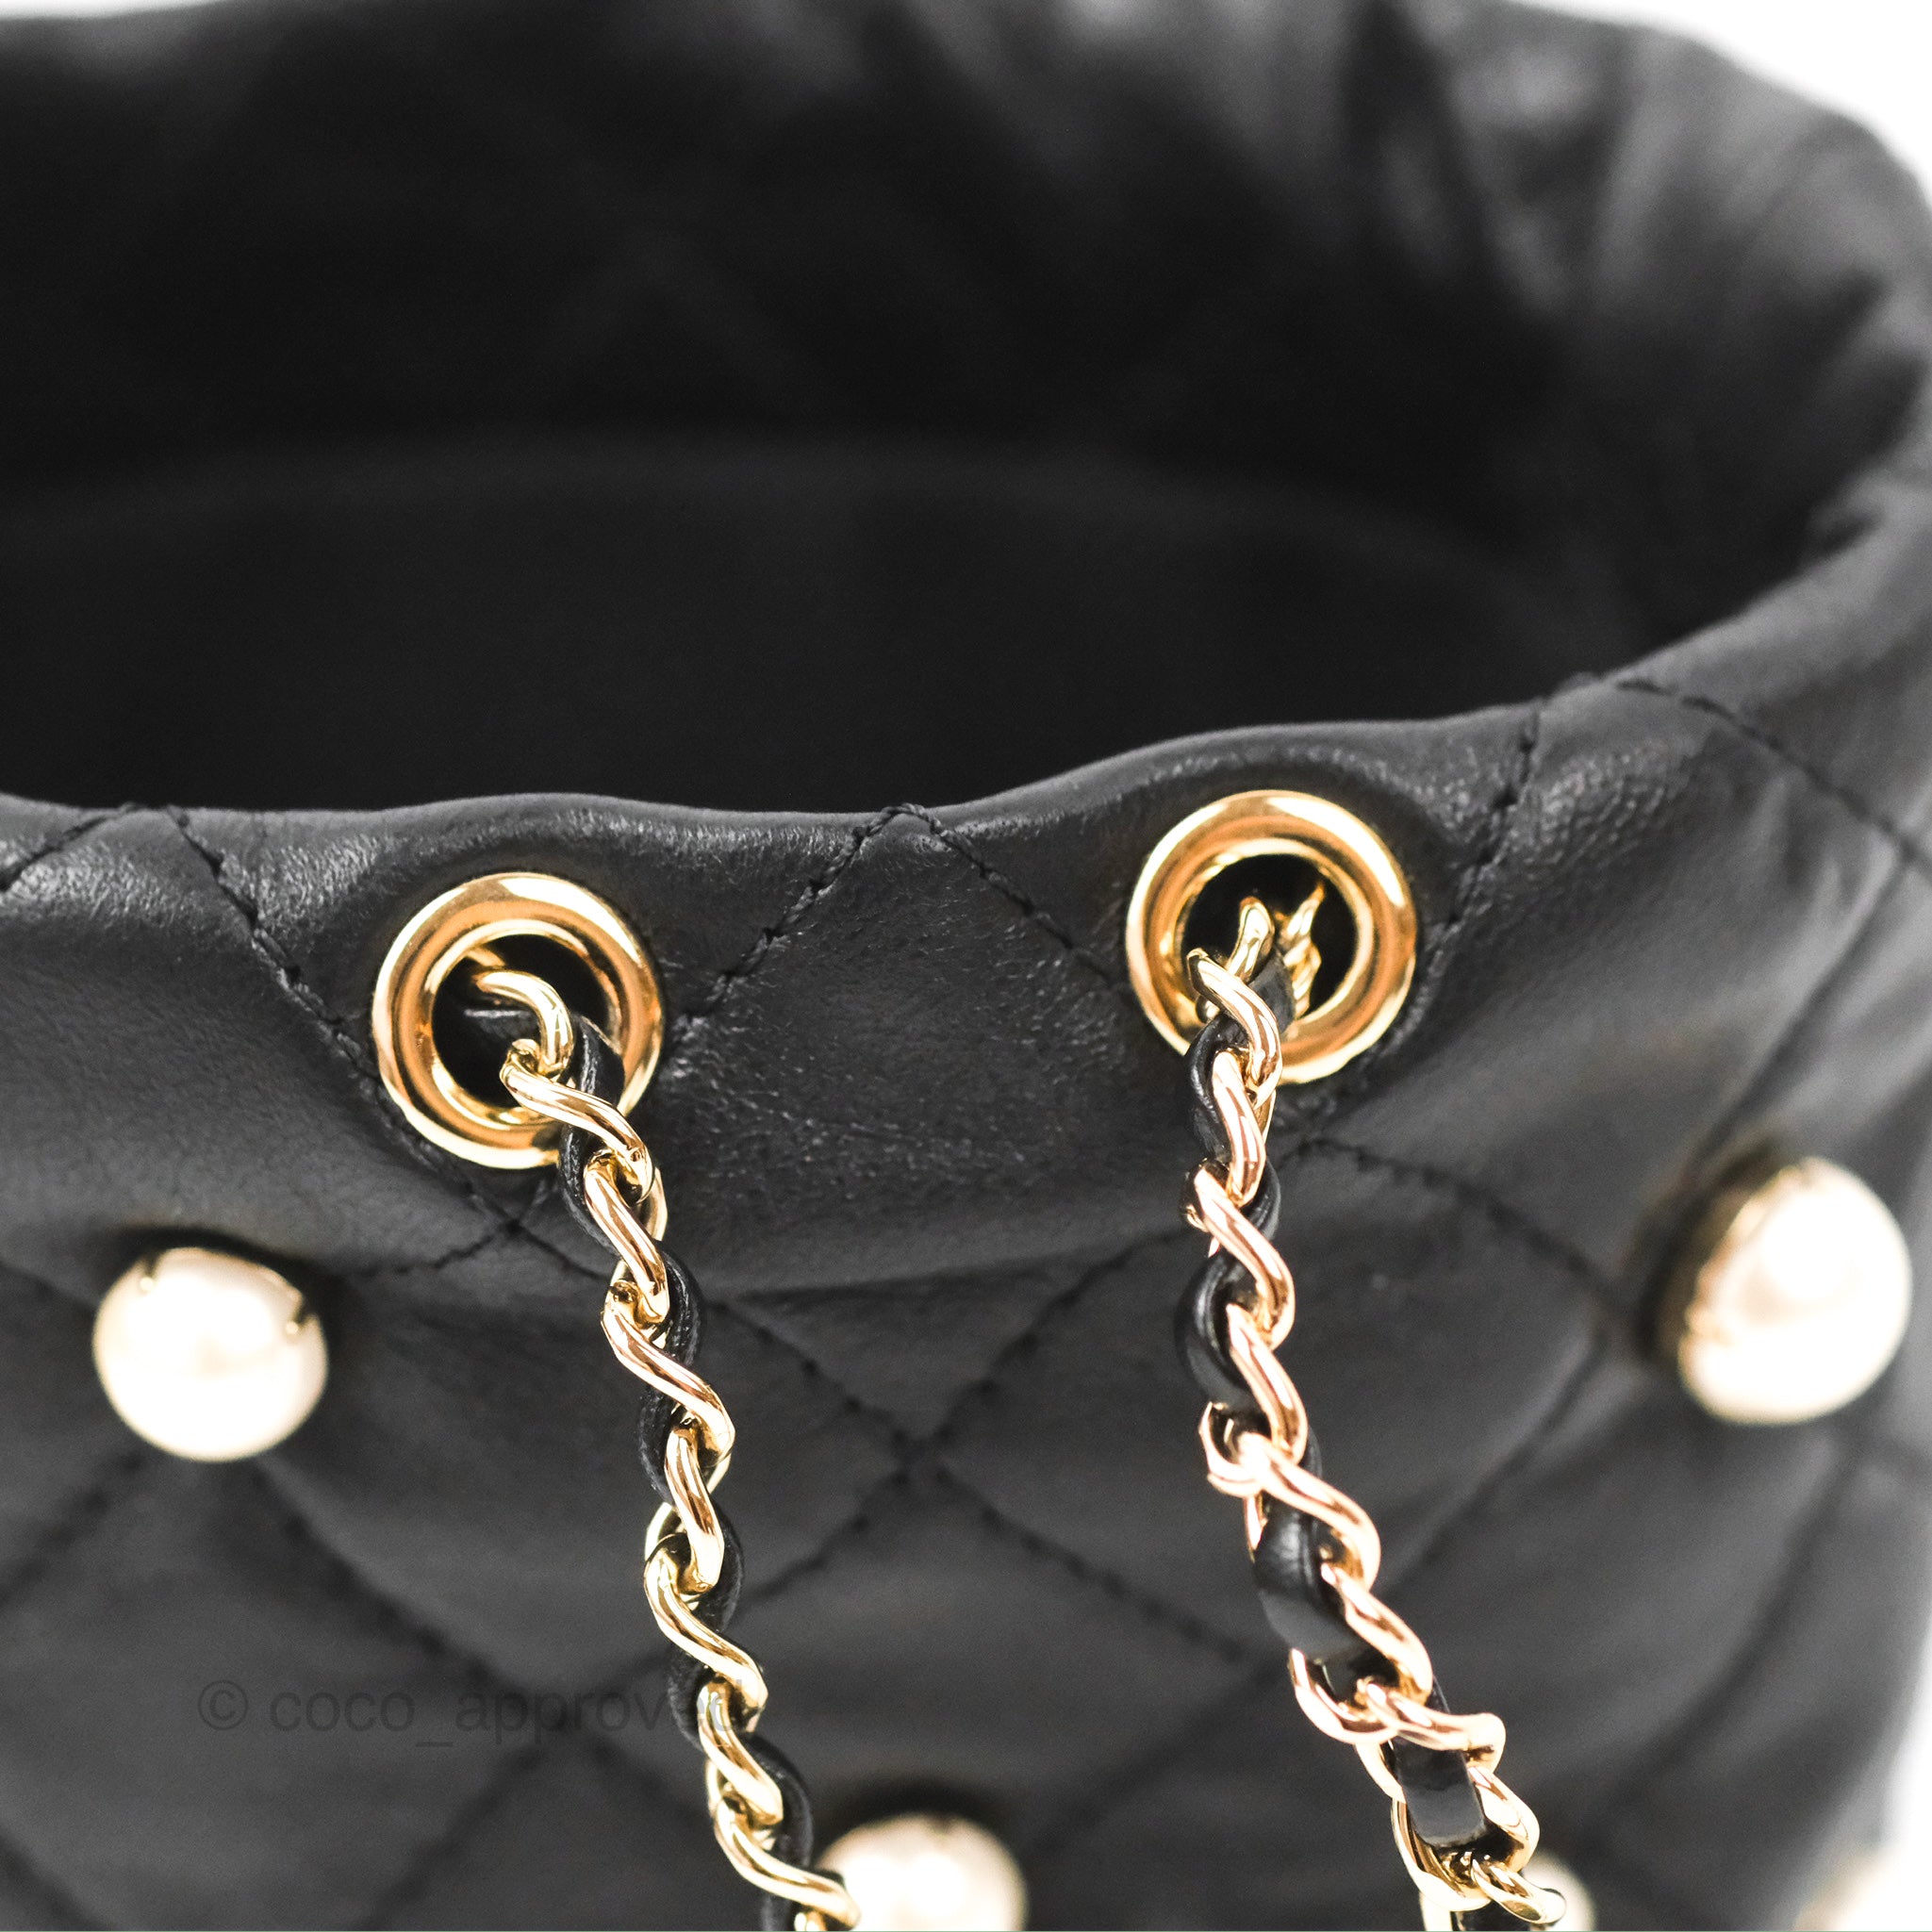 CHANEL Calfskin Quilted Pearl Mini About Pearls Drawstring Bucket Bag Black  753548